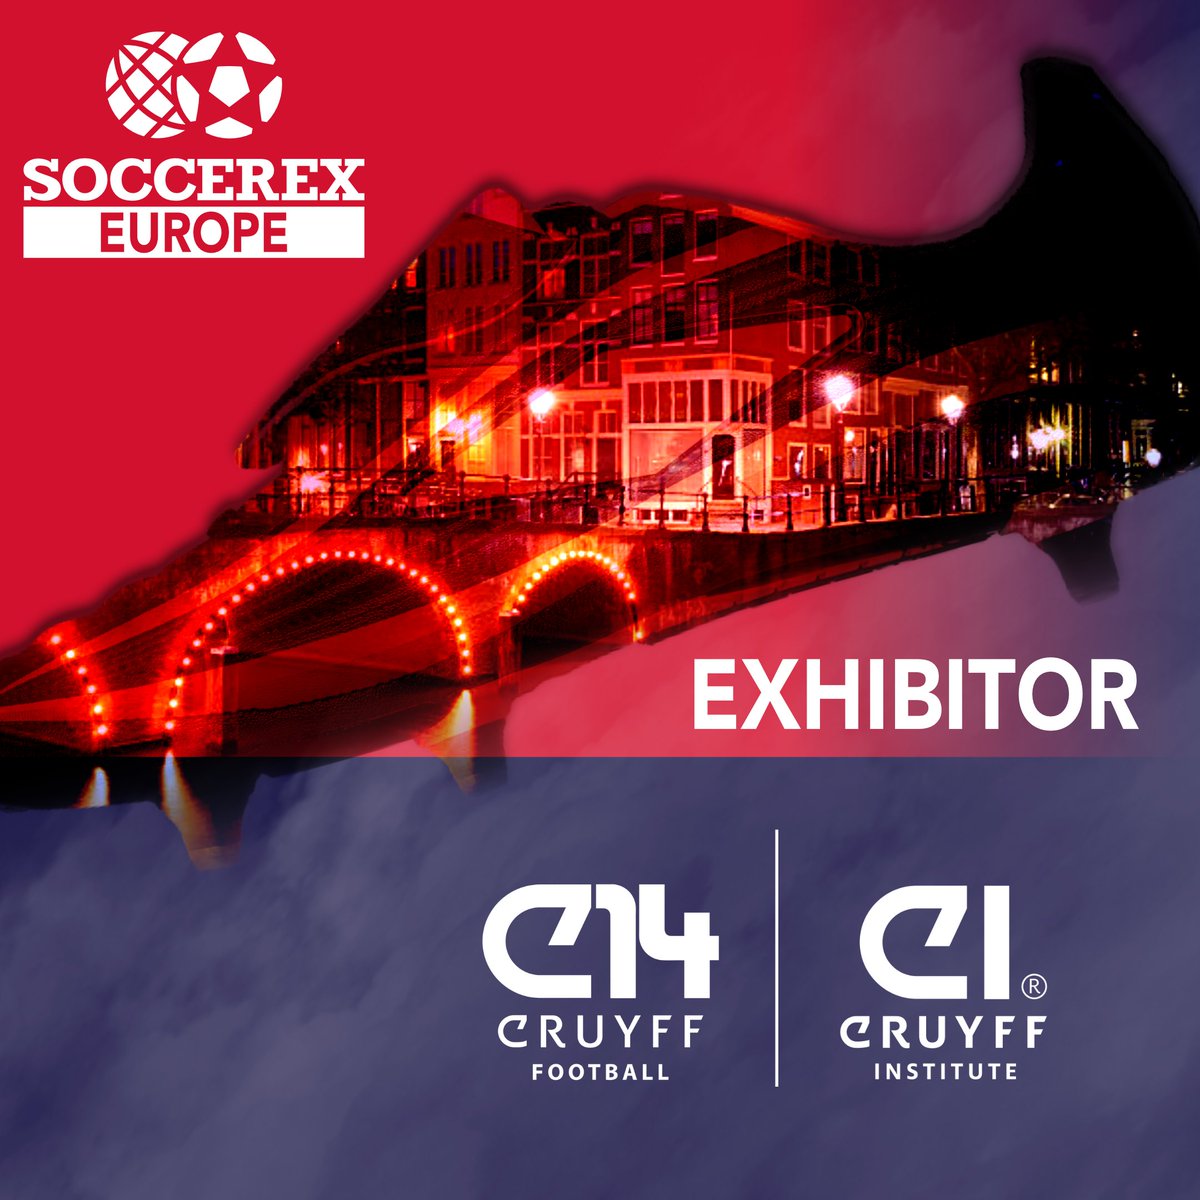 This May, @CruyffInstitute and @CruyffFootball will be exhibiting at #Soccerex Europe, hosted at @cruijffarena ⚽️ 

Don't miss it! soccerex.com/europe-2024/#b… 

#EducatingLeaders #CruyffLegacy #SoccerexEurope